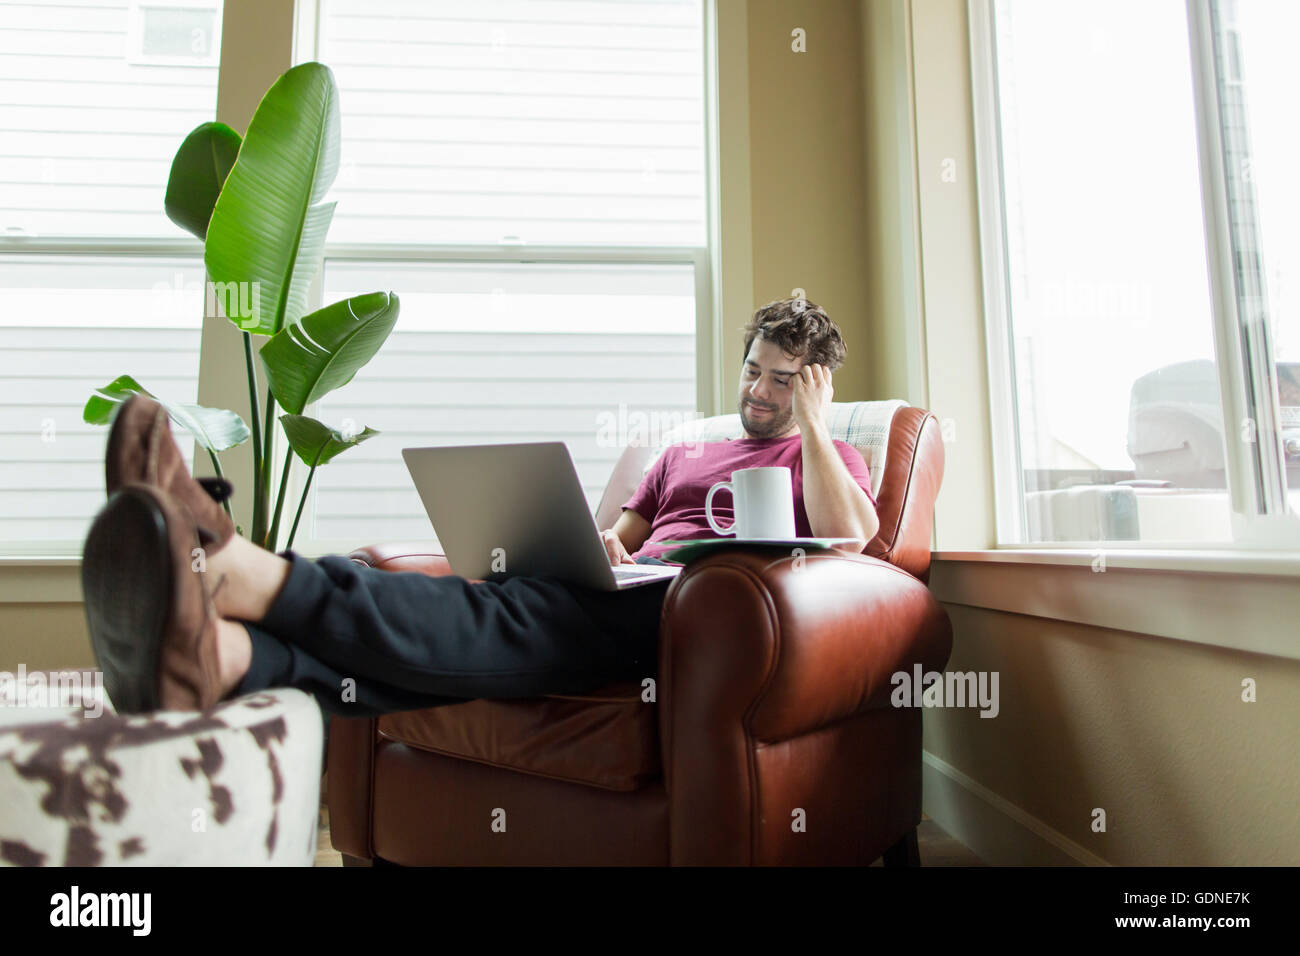 Man relaxing on living room armchair with feet up browsing laptop Stock Photo